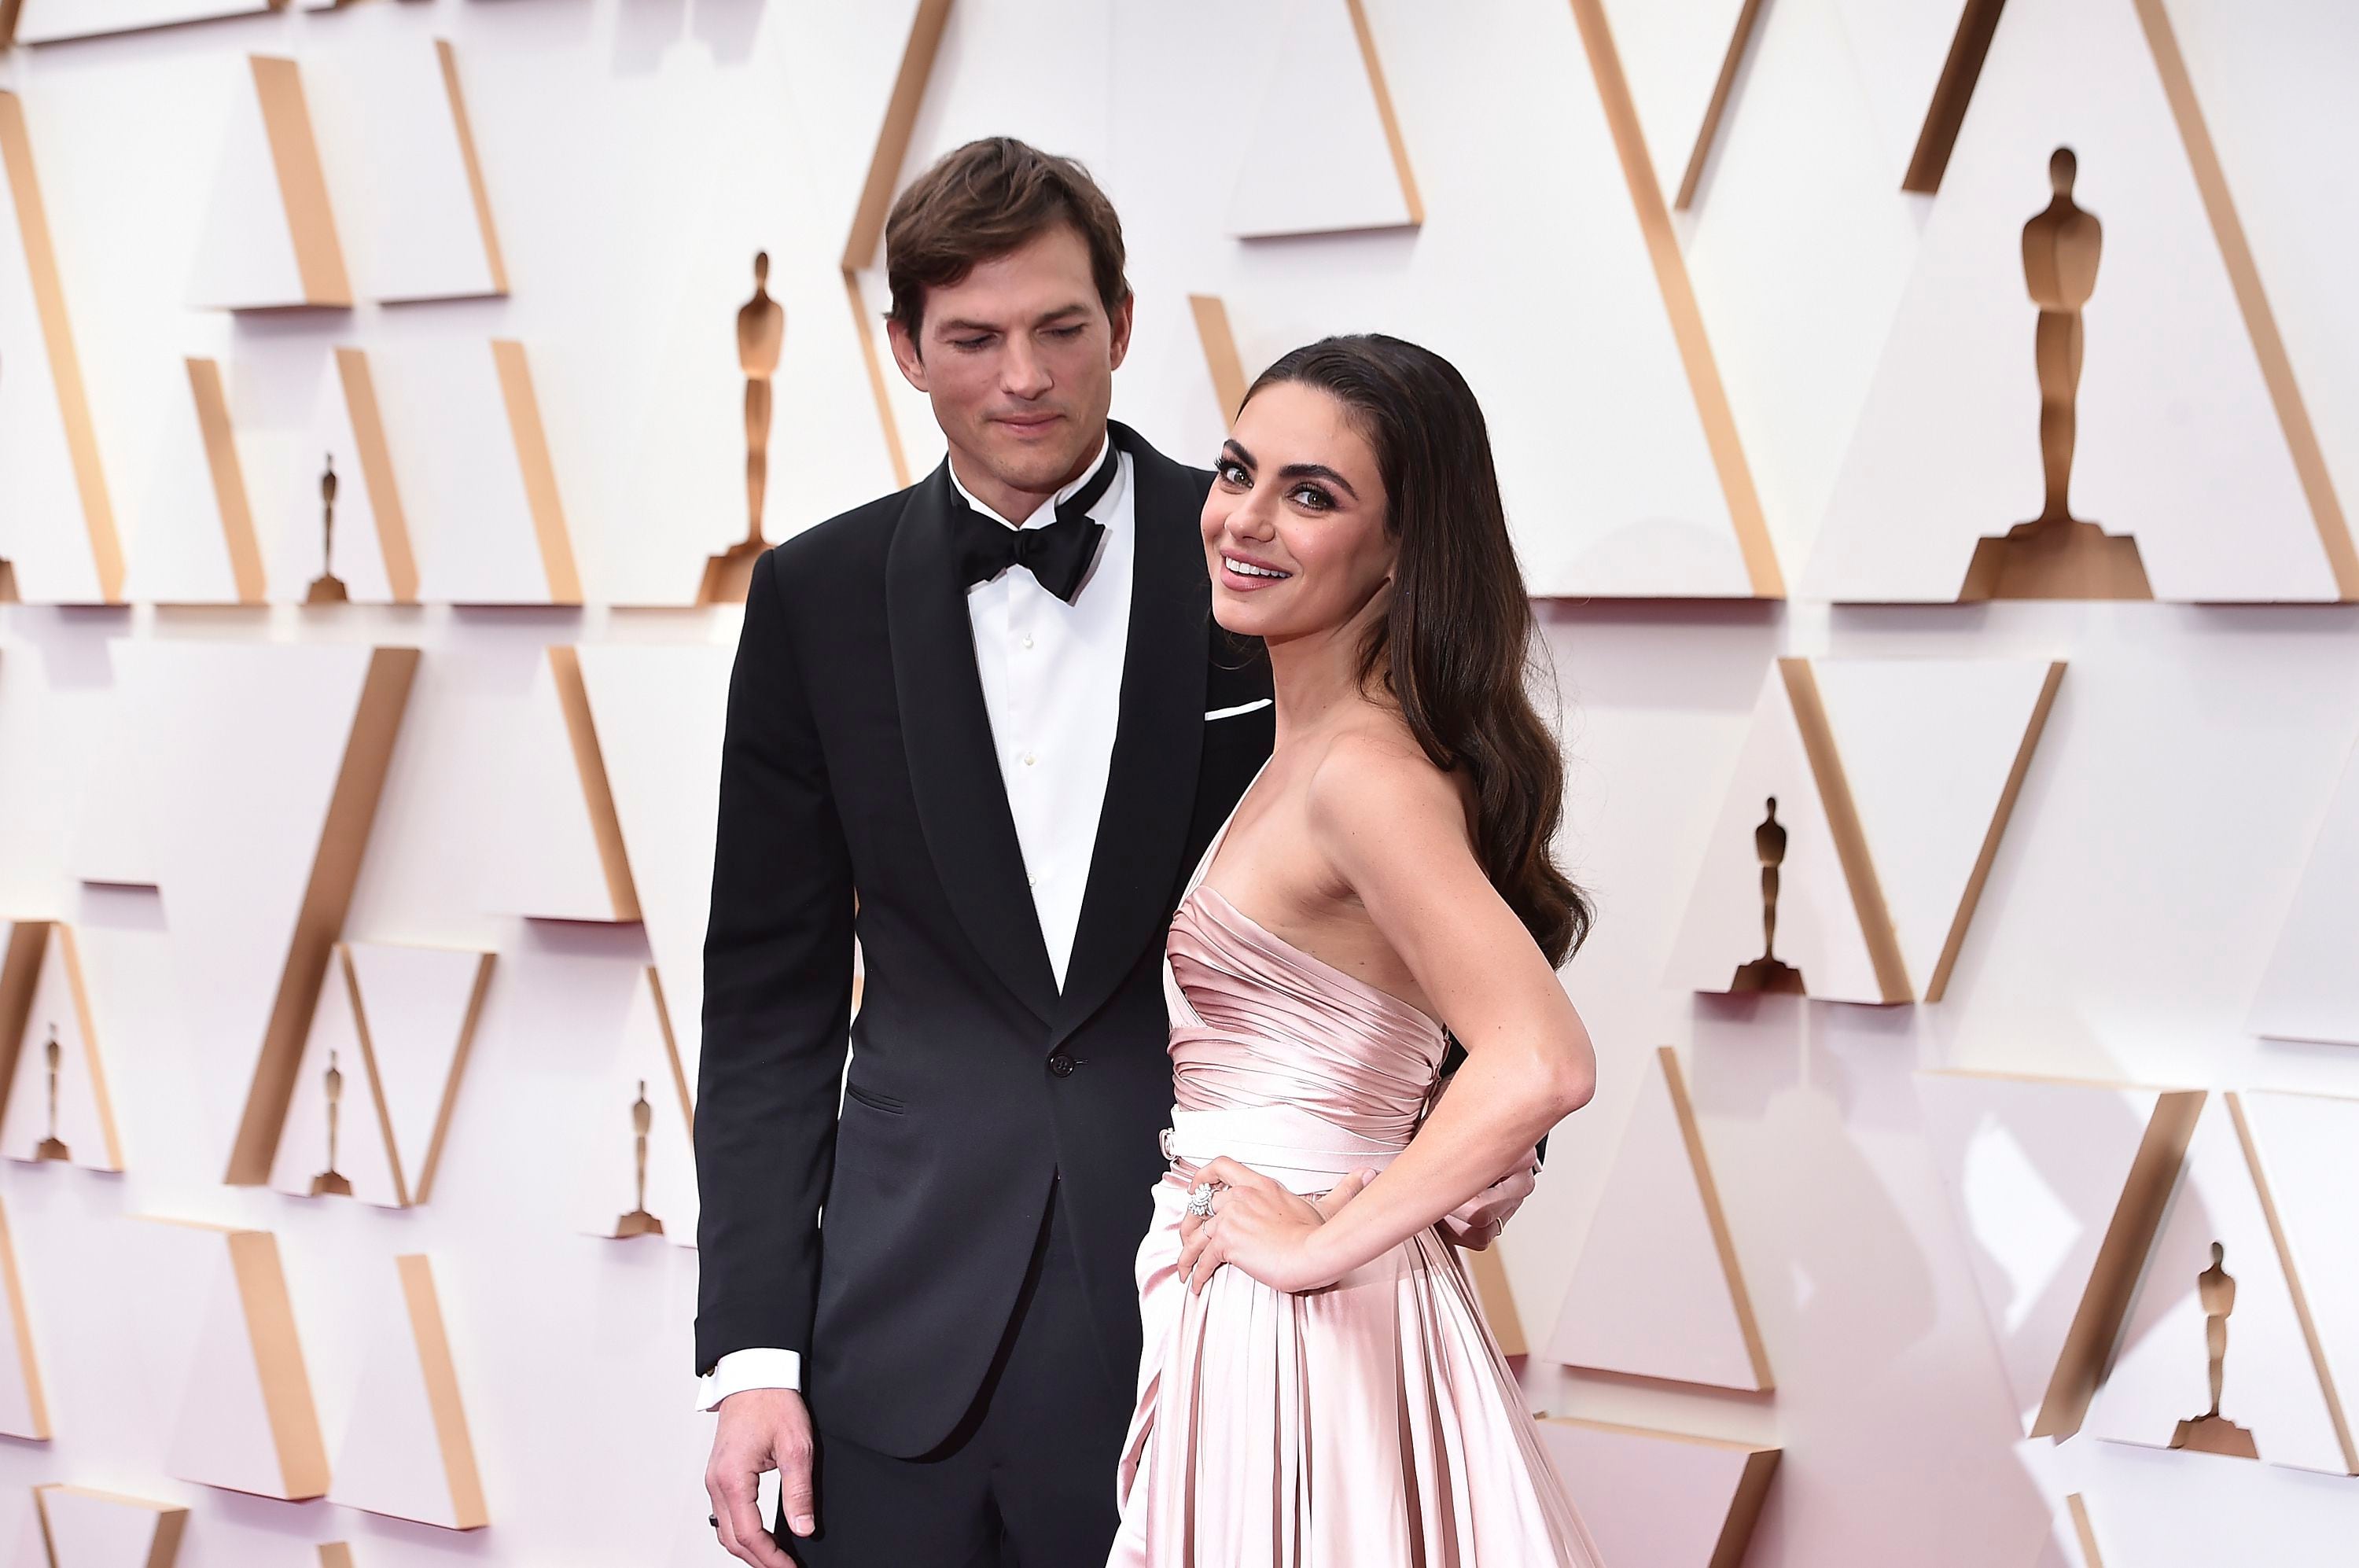 FILE - Ashton Kutcher, left, and Mila Kunis arrive at the Oscars, Sunday, March 27, 2022, at the Dolby Theater in Los Angeles.  (Photo by Jordan Strauss/Invision/AP, File)